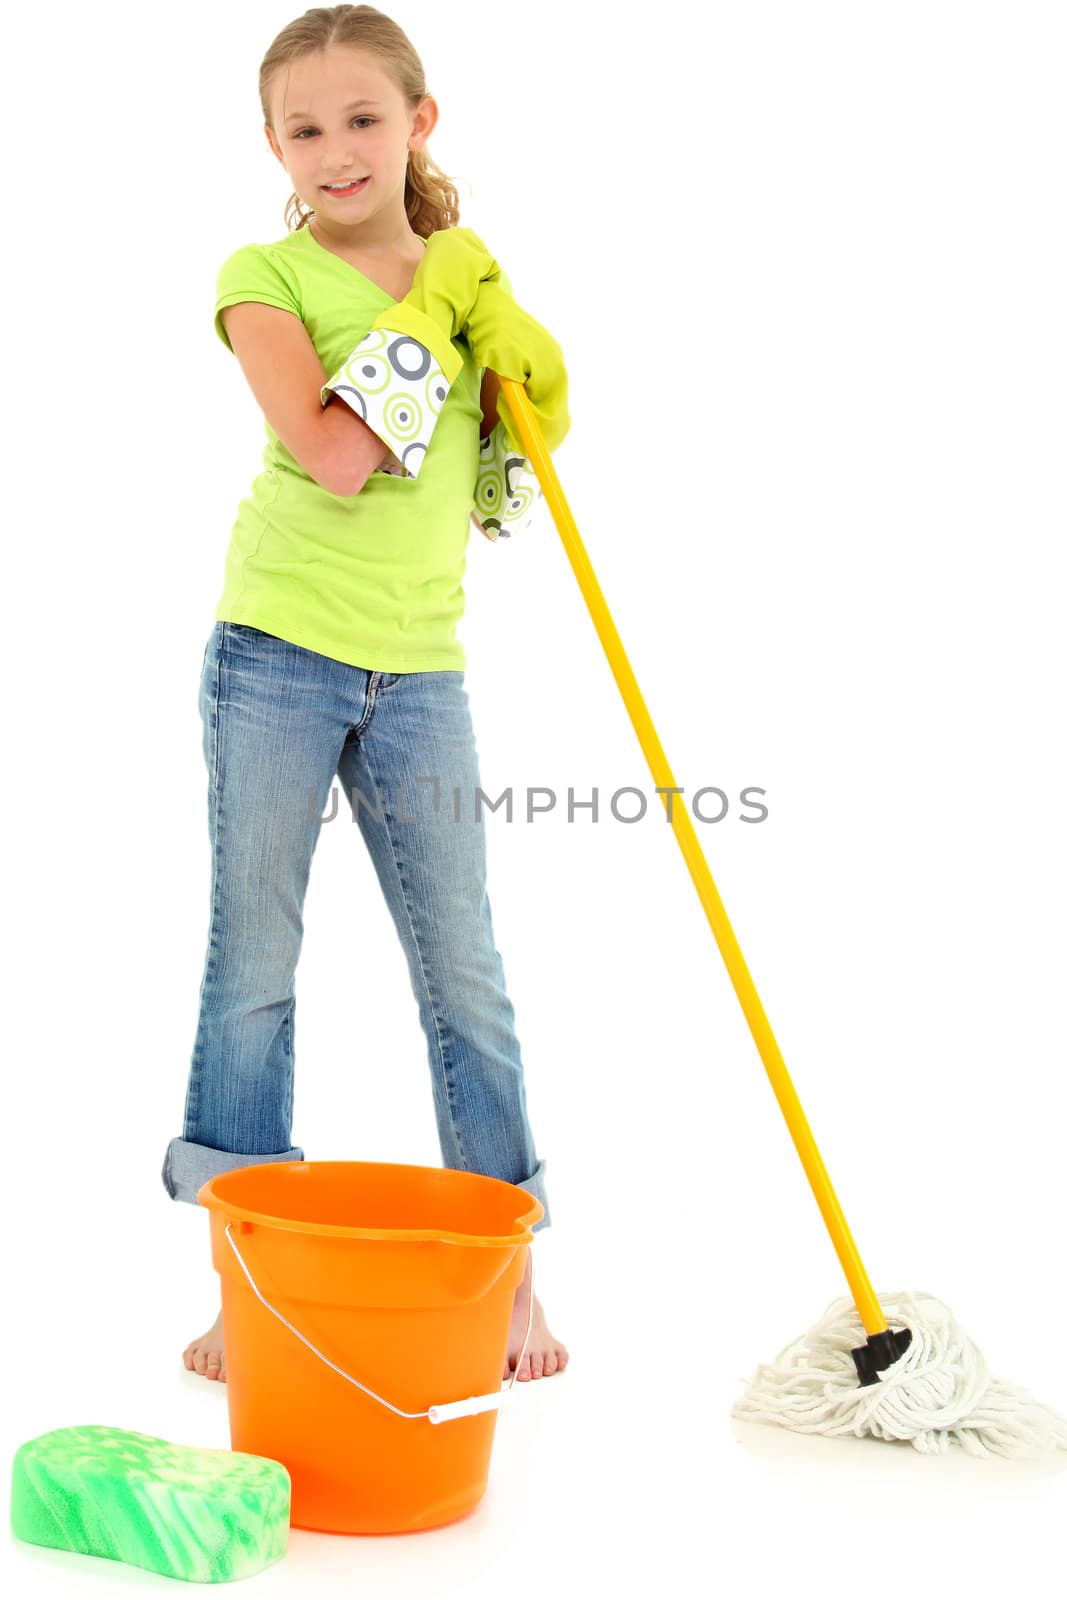 Beautiful Young Girl Doing Spring Cleaning Chores with Mop and B by duplass